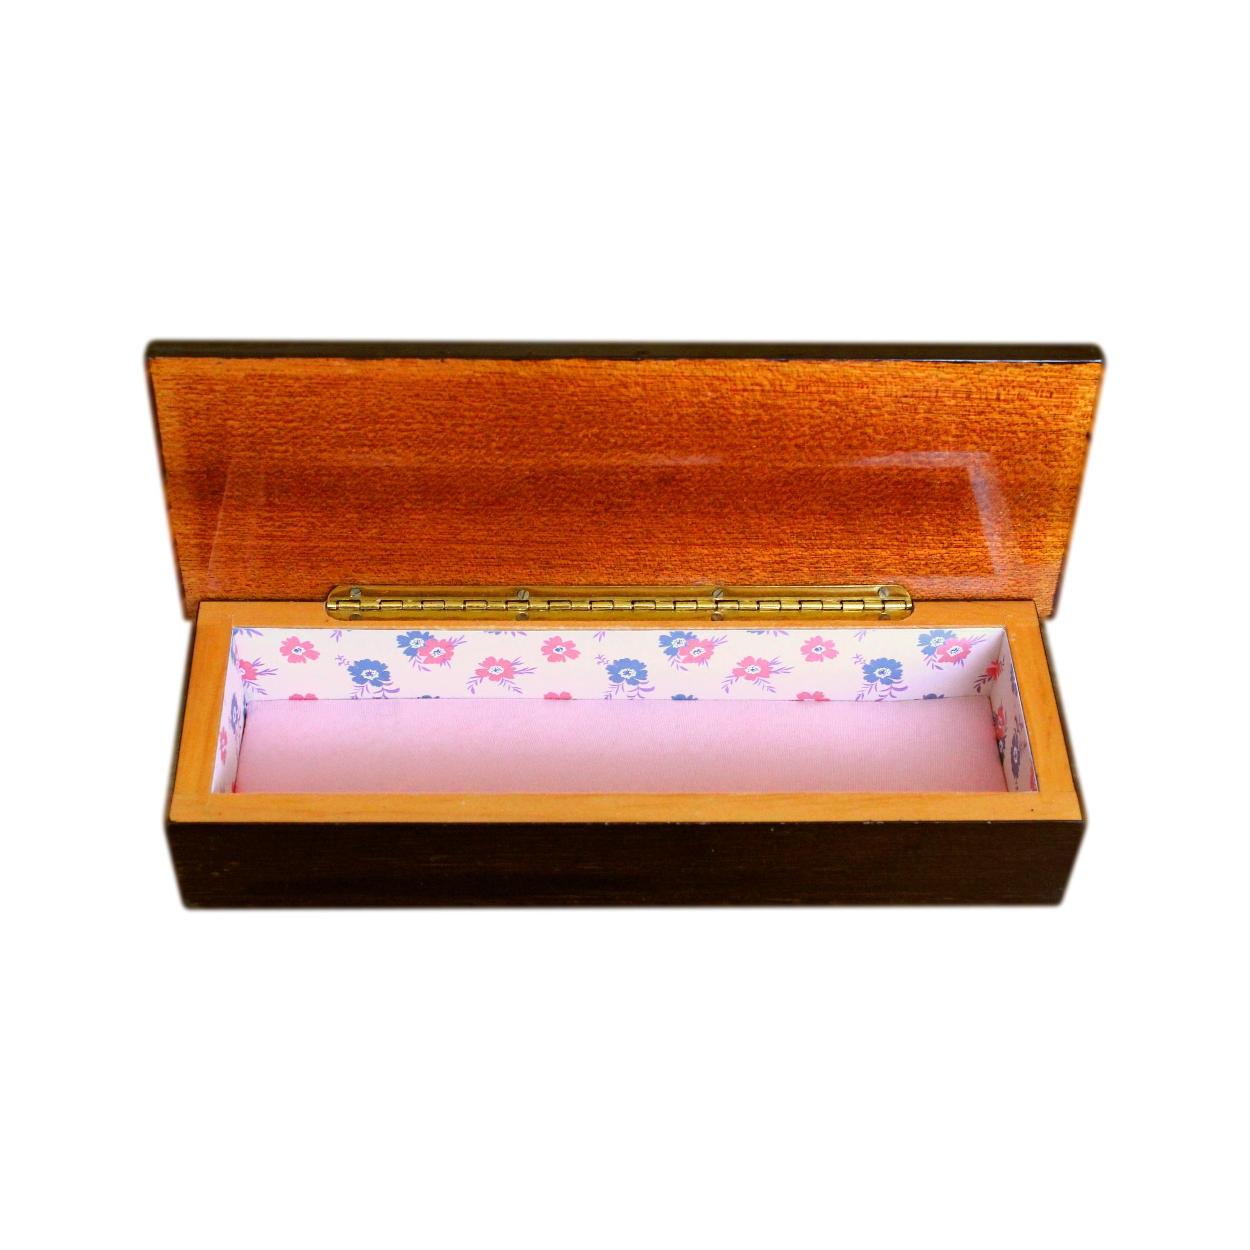 Newly lined vintage pencil box